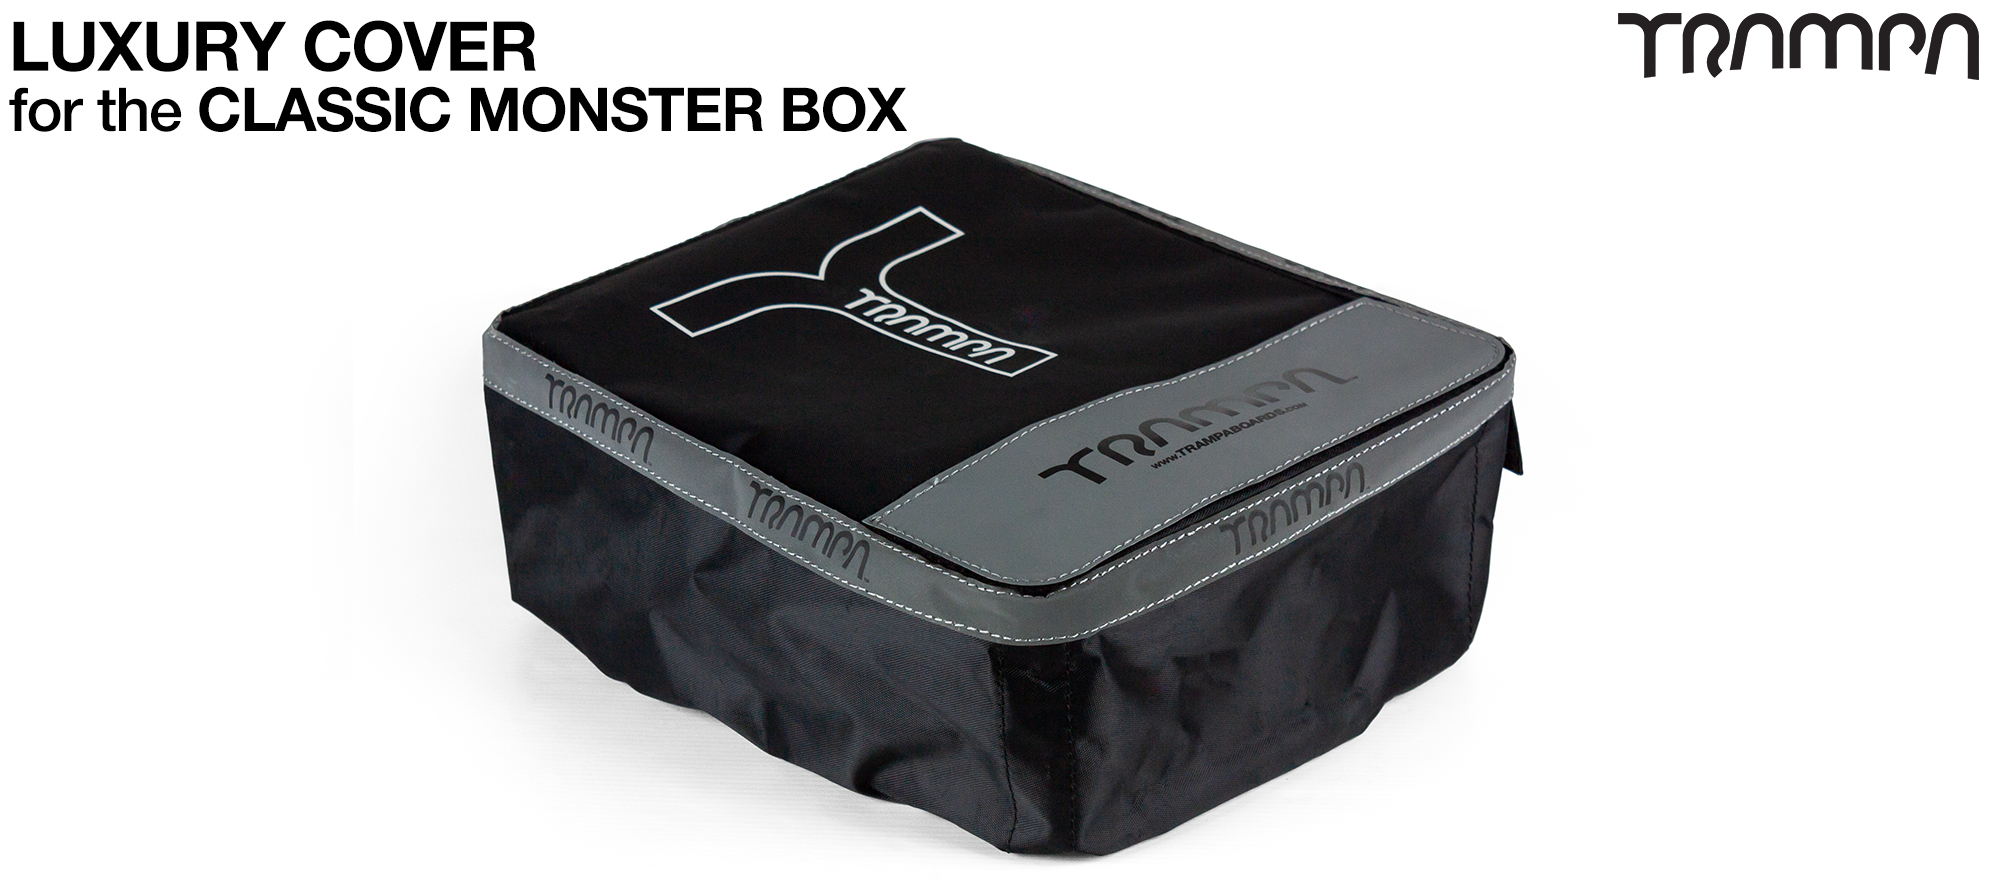 HEAVY DUTY CLASSIC Monster Box protective Cover with Inspection pit & tool Pockets